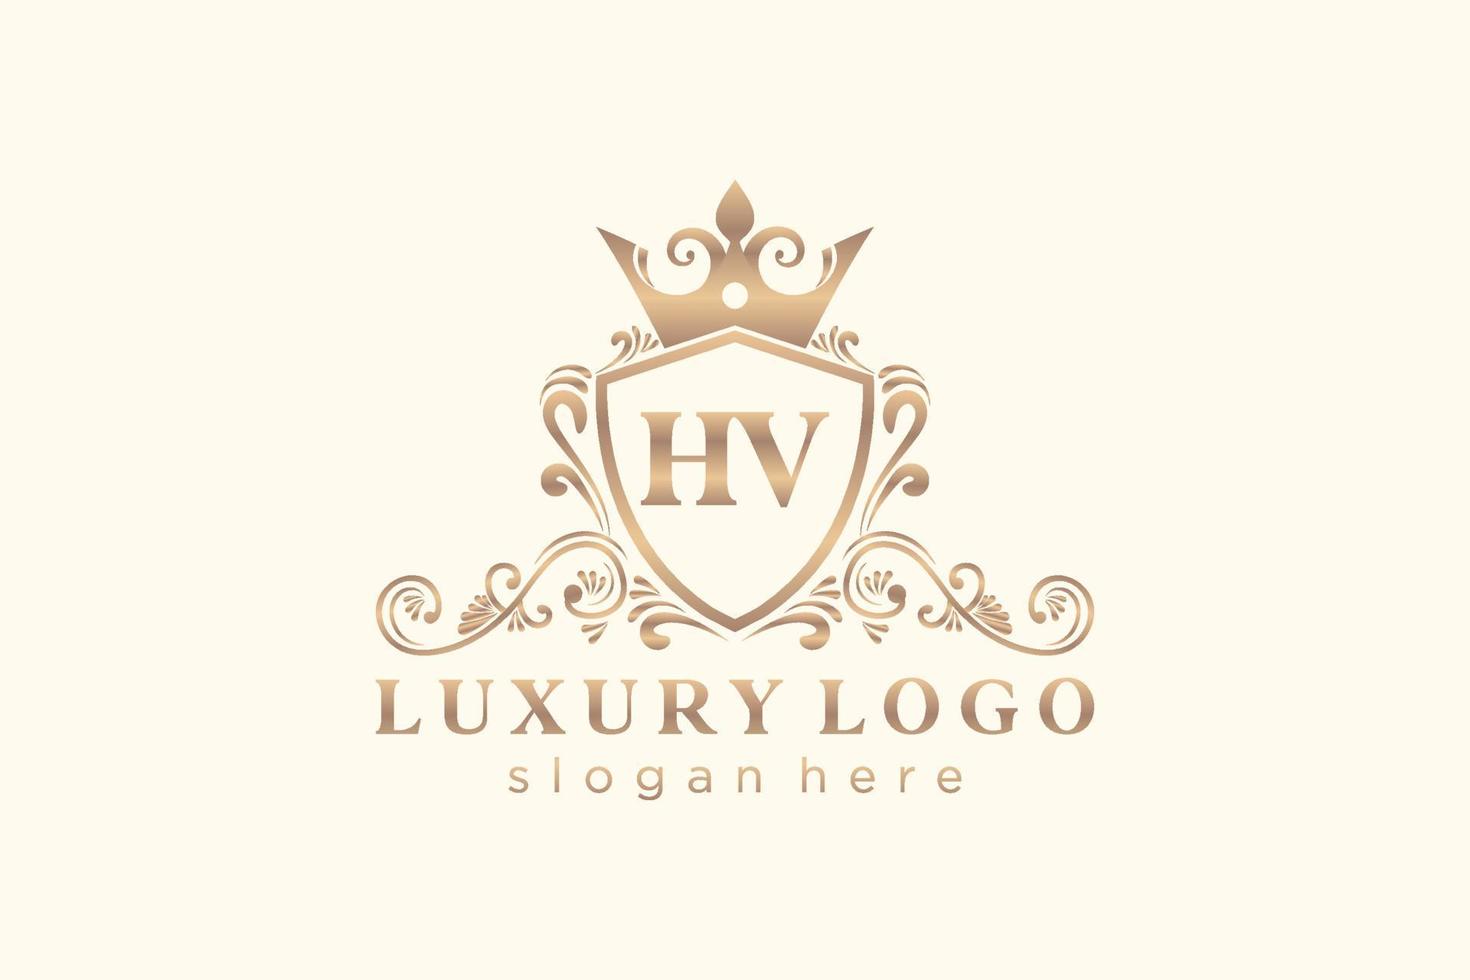 Initial HV Letter Royal Luxury Logo template in vector art for Restaurant, Royalty, Boutique, Cafe, Hotel, Heraldic, Jewelry, Fashion and other vector illustration.